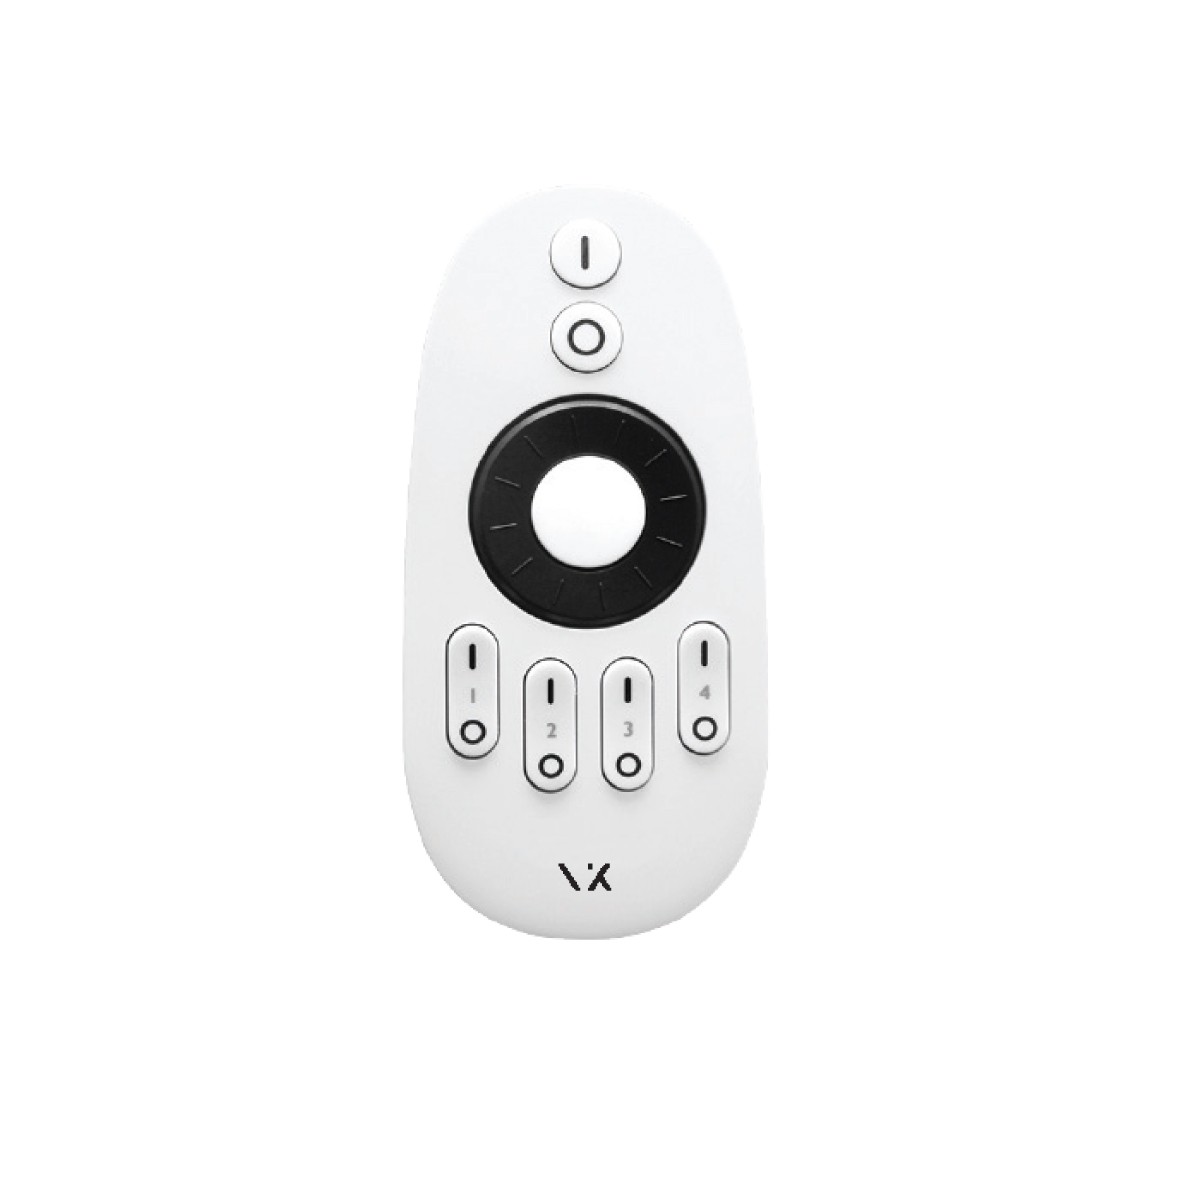 4 Zone remote controller, 1 channel, 3V, 30m distance, Dimmable, 2.4GHz, 6dBm  VK/FUT006